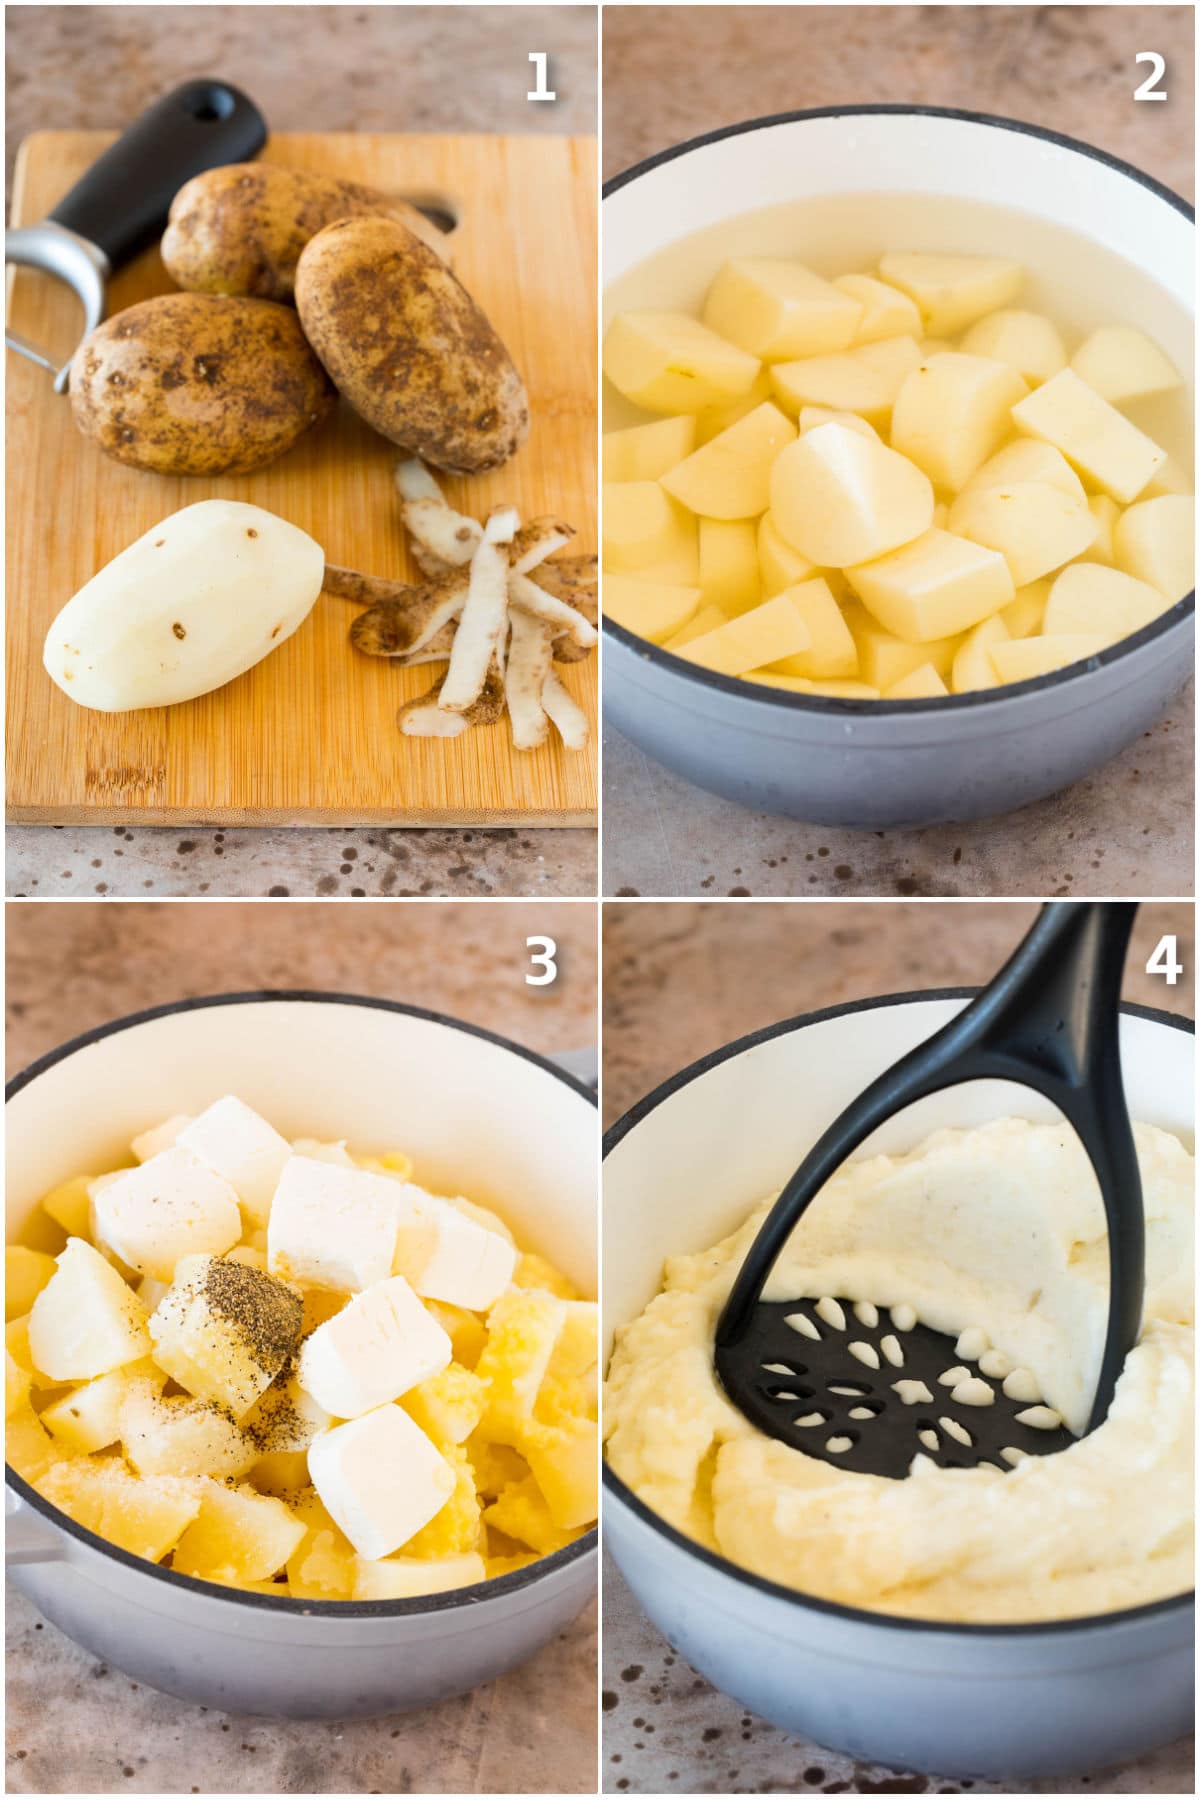 Step by step shots on how to make mashed potatoes.